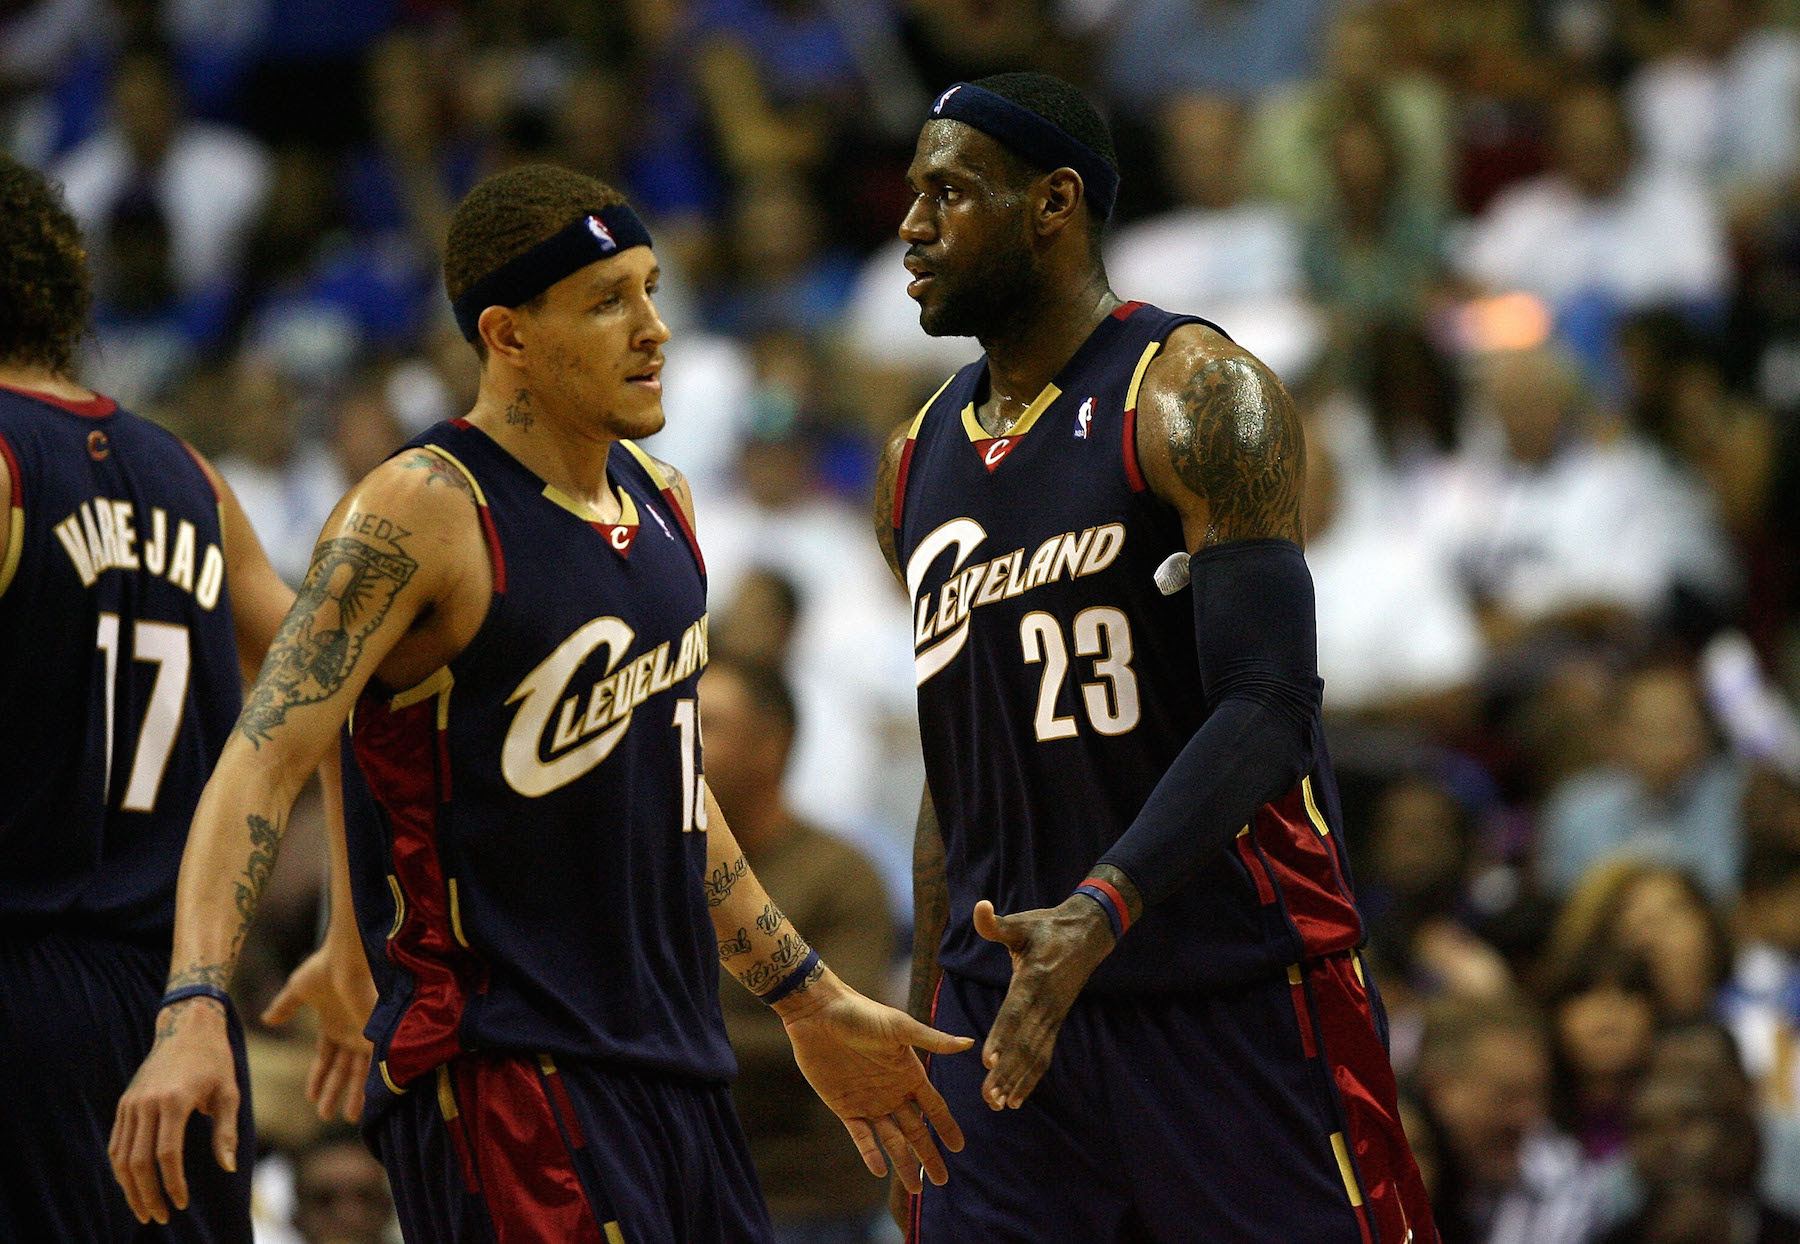 What Happened With Lebron James and Delonte West?